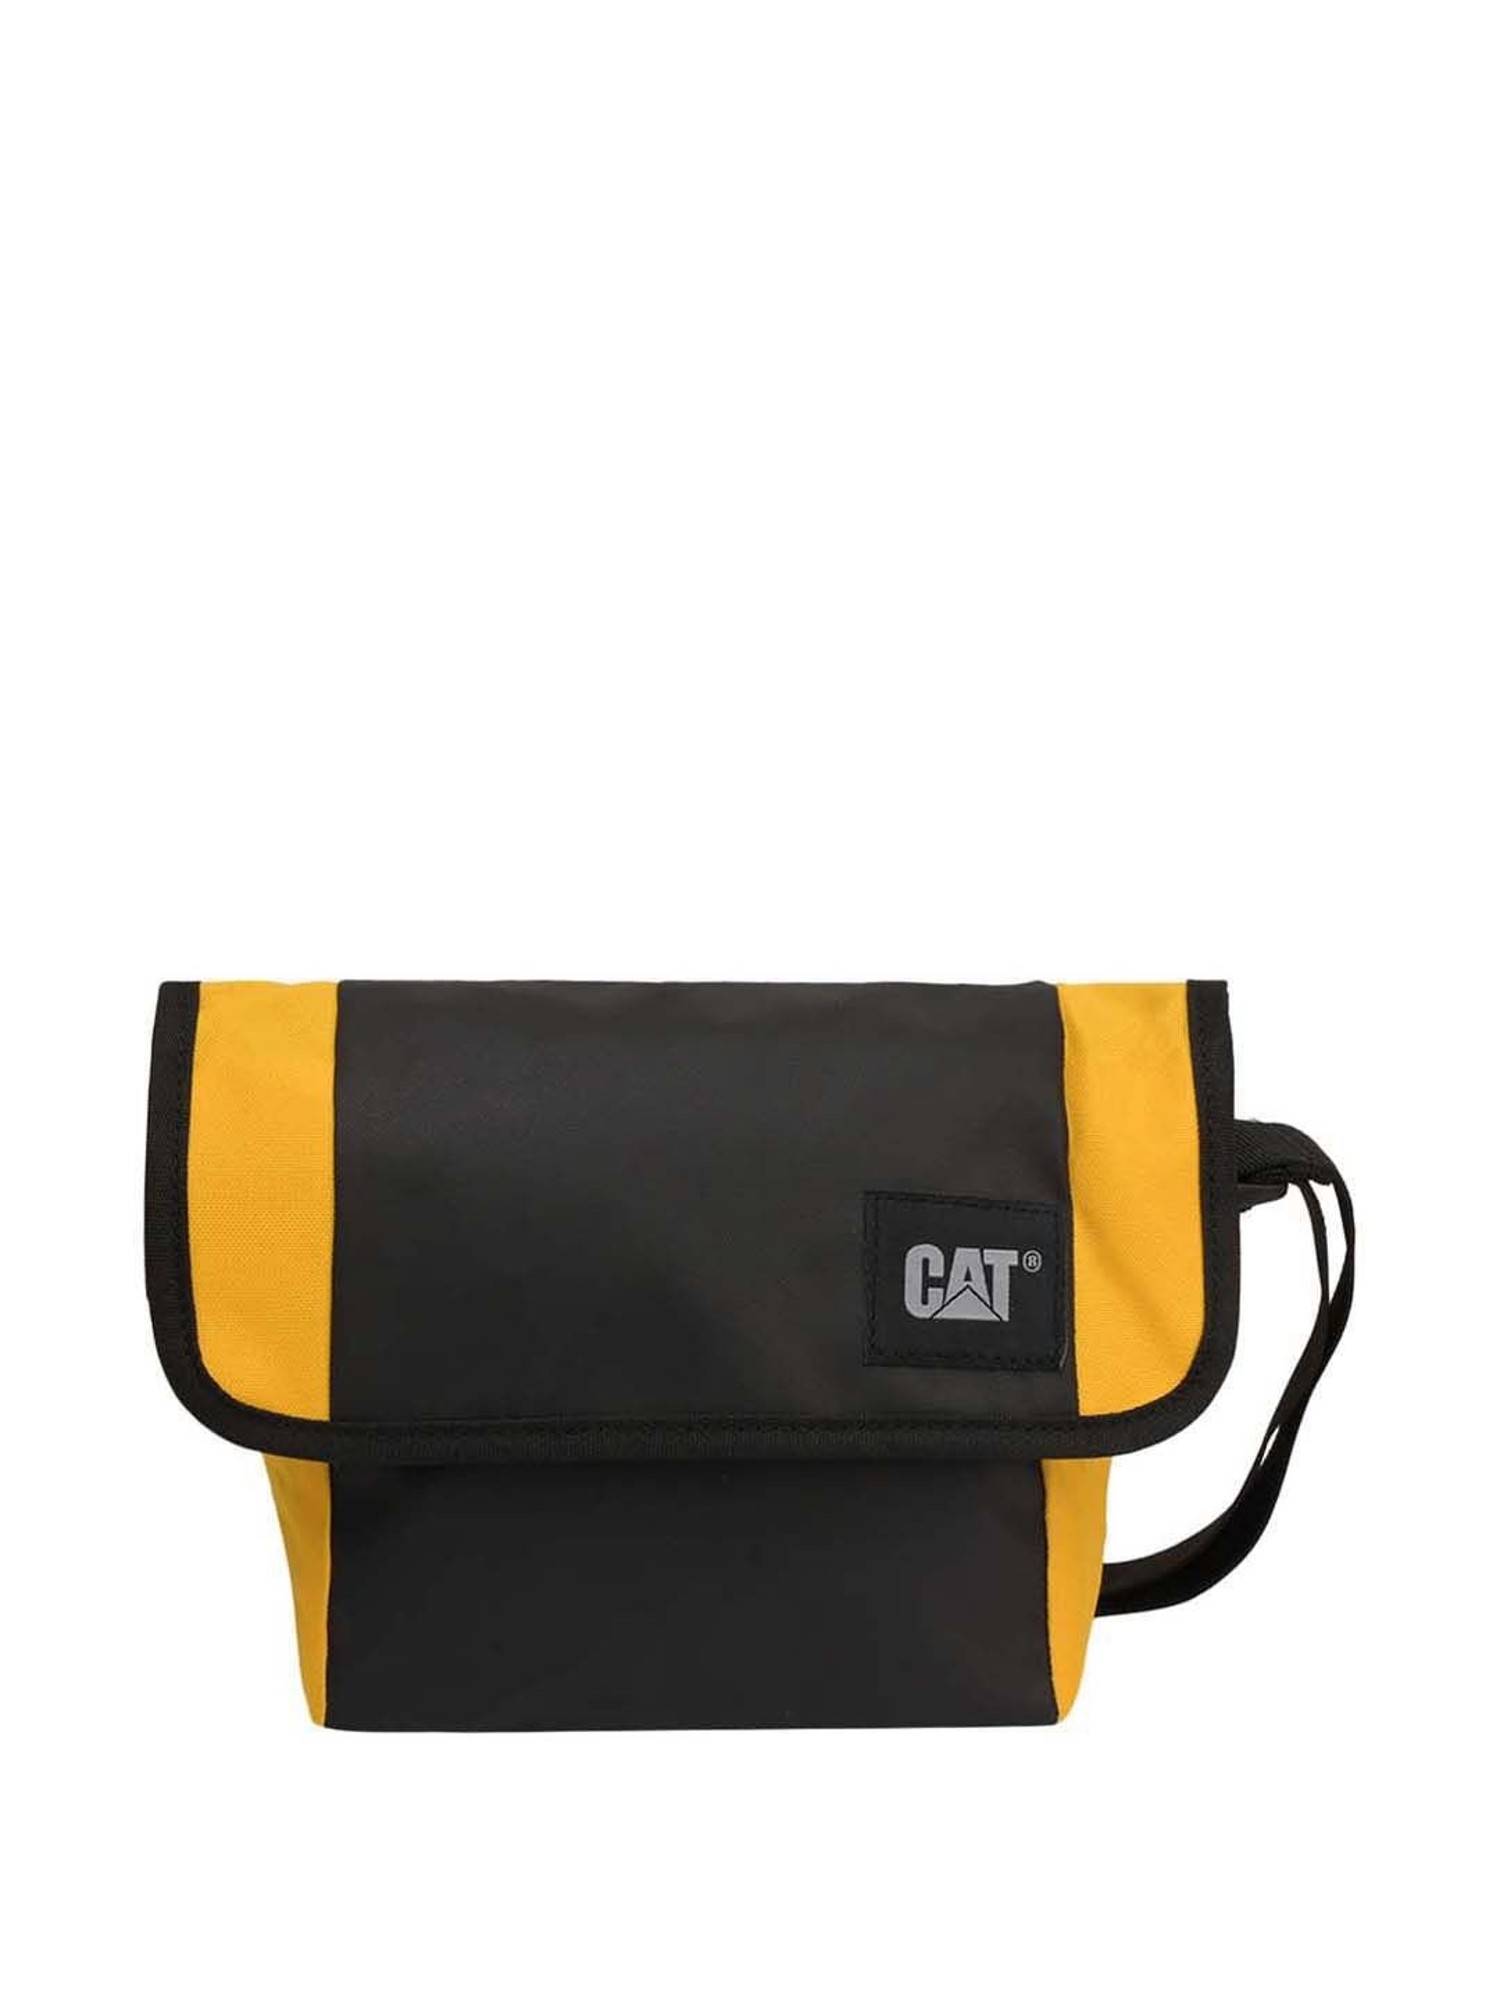 Buy Cute Cat Character Printing Canvas Shoulder Bag Retro Casual Handbags  Messenger Bags Online at Low Prices in India  Amazonin